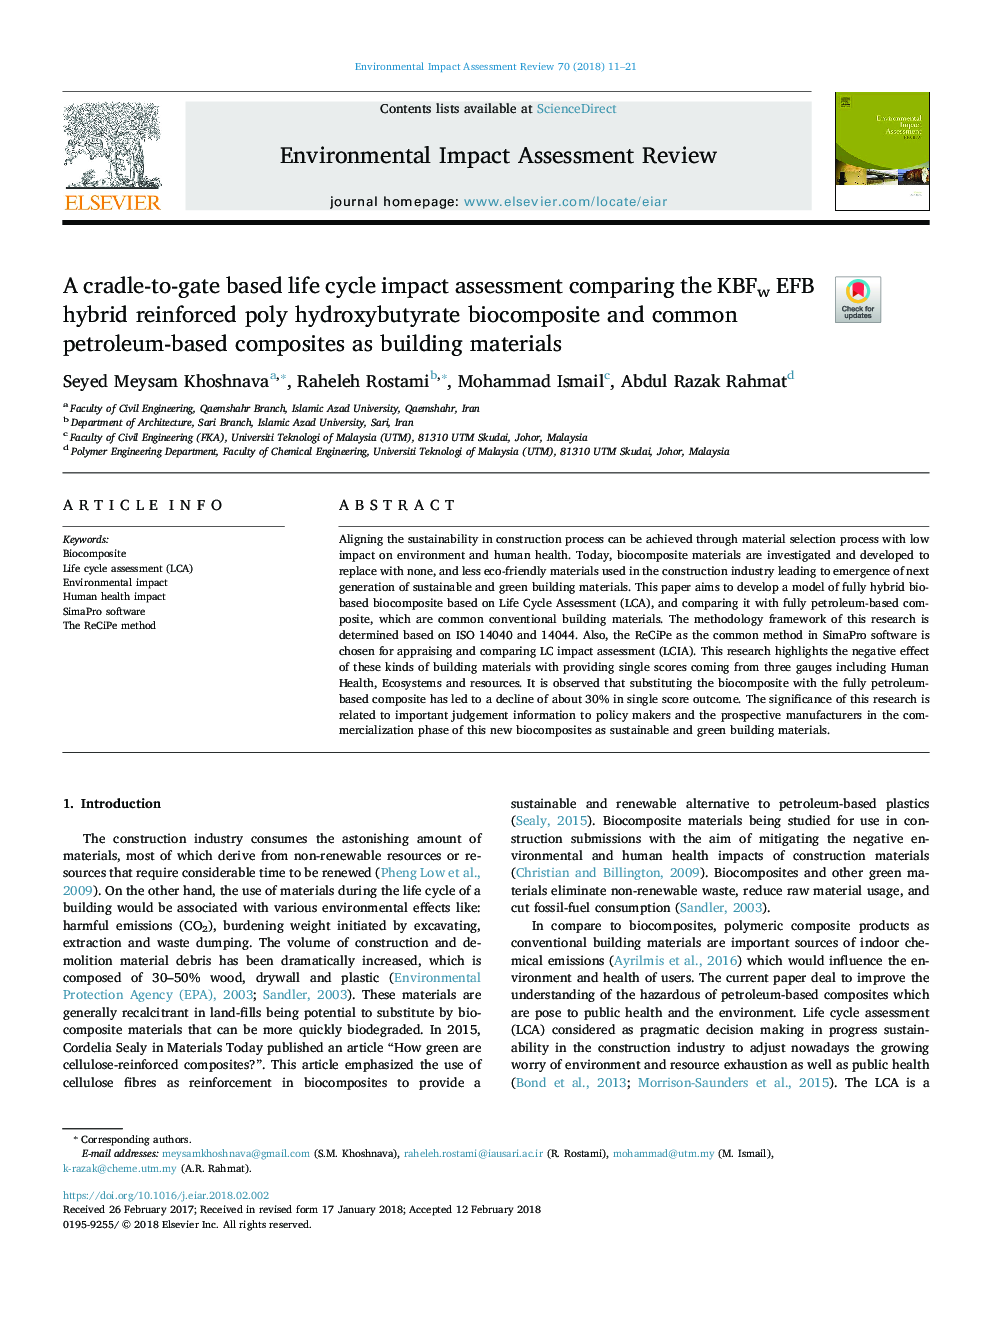 A cradle-to-gate based life cycle impact assessment comparing the KBFw EFB hybrid reinforced poly hydroxybutyrate biocomposite and common petroleum-based composites as building materials